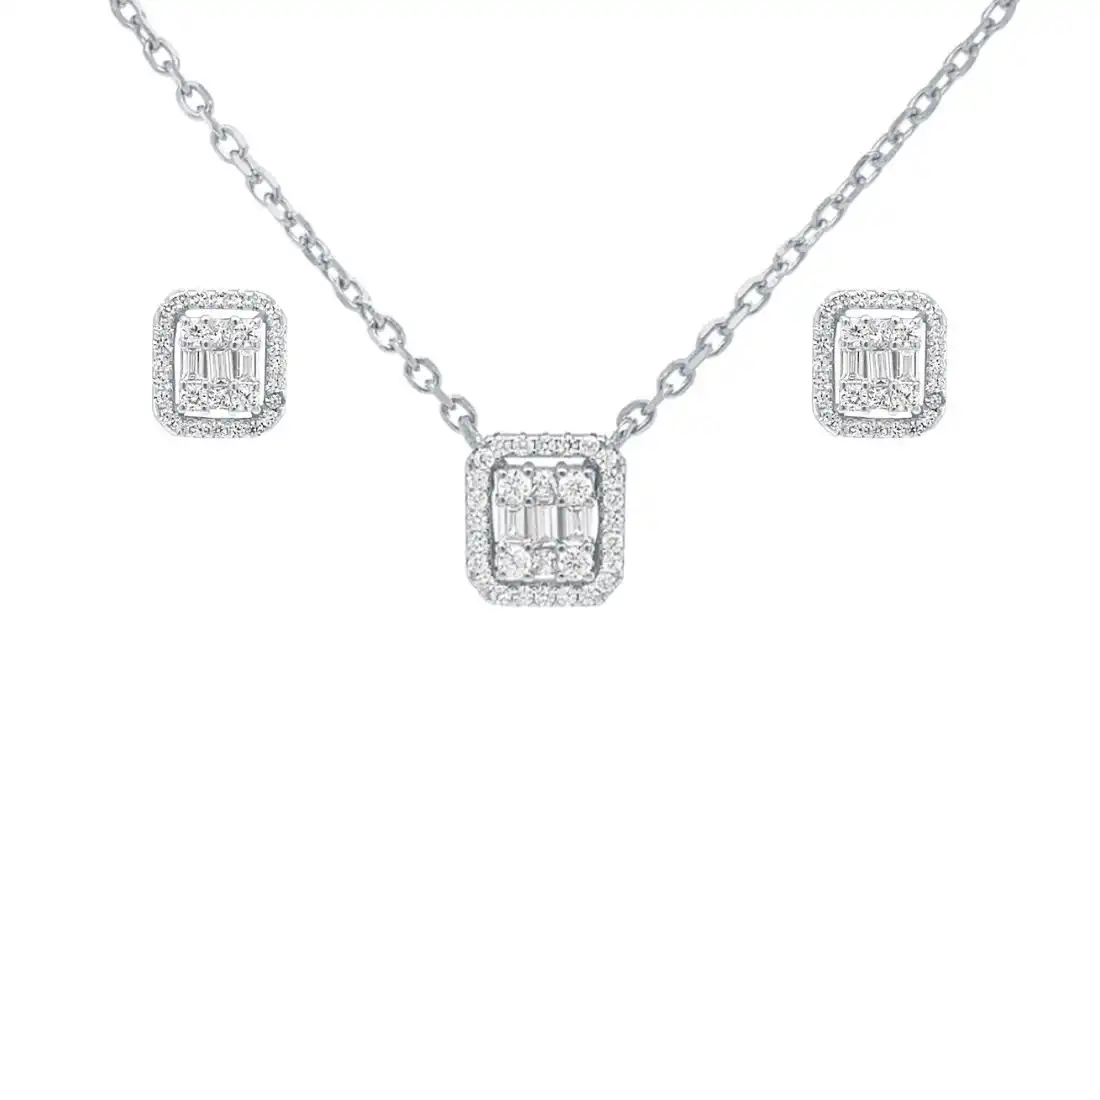 Halo Earring and Necklace Set with Cubic Zirconia in Sterling Silver